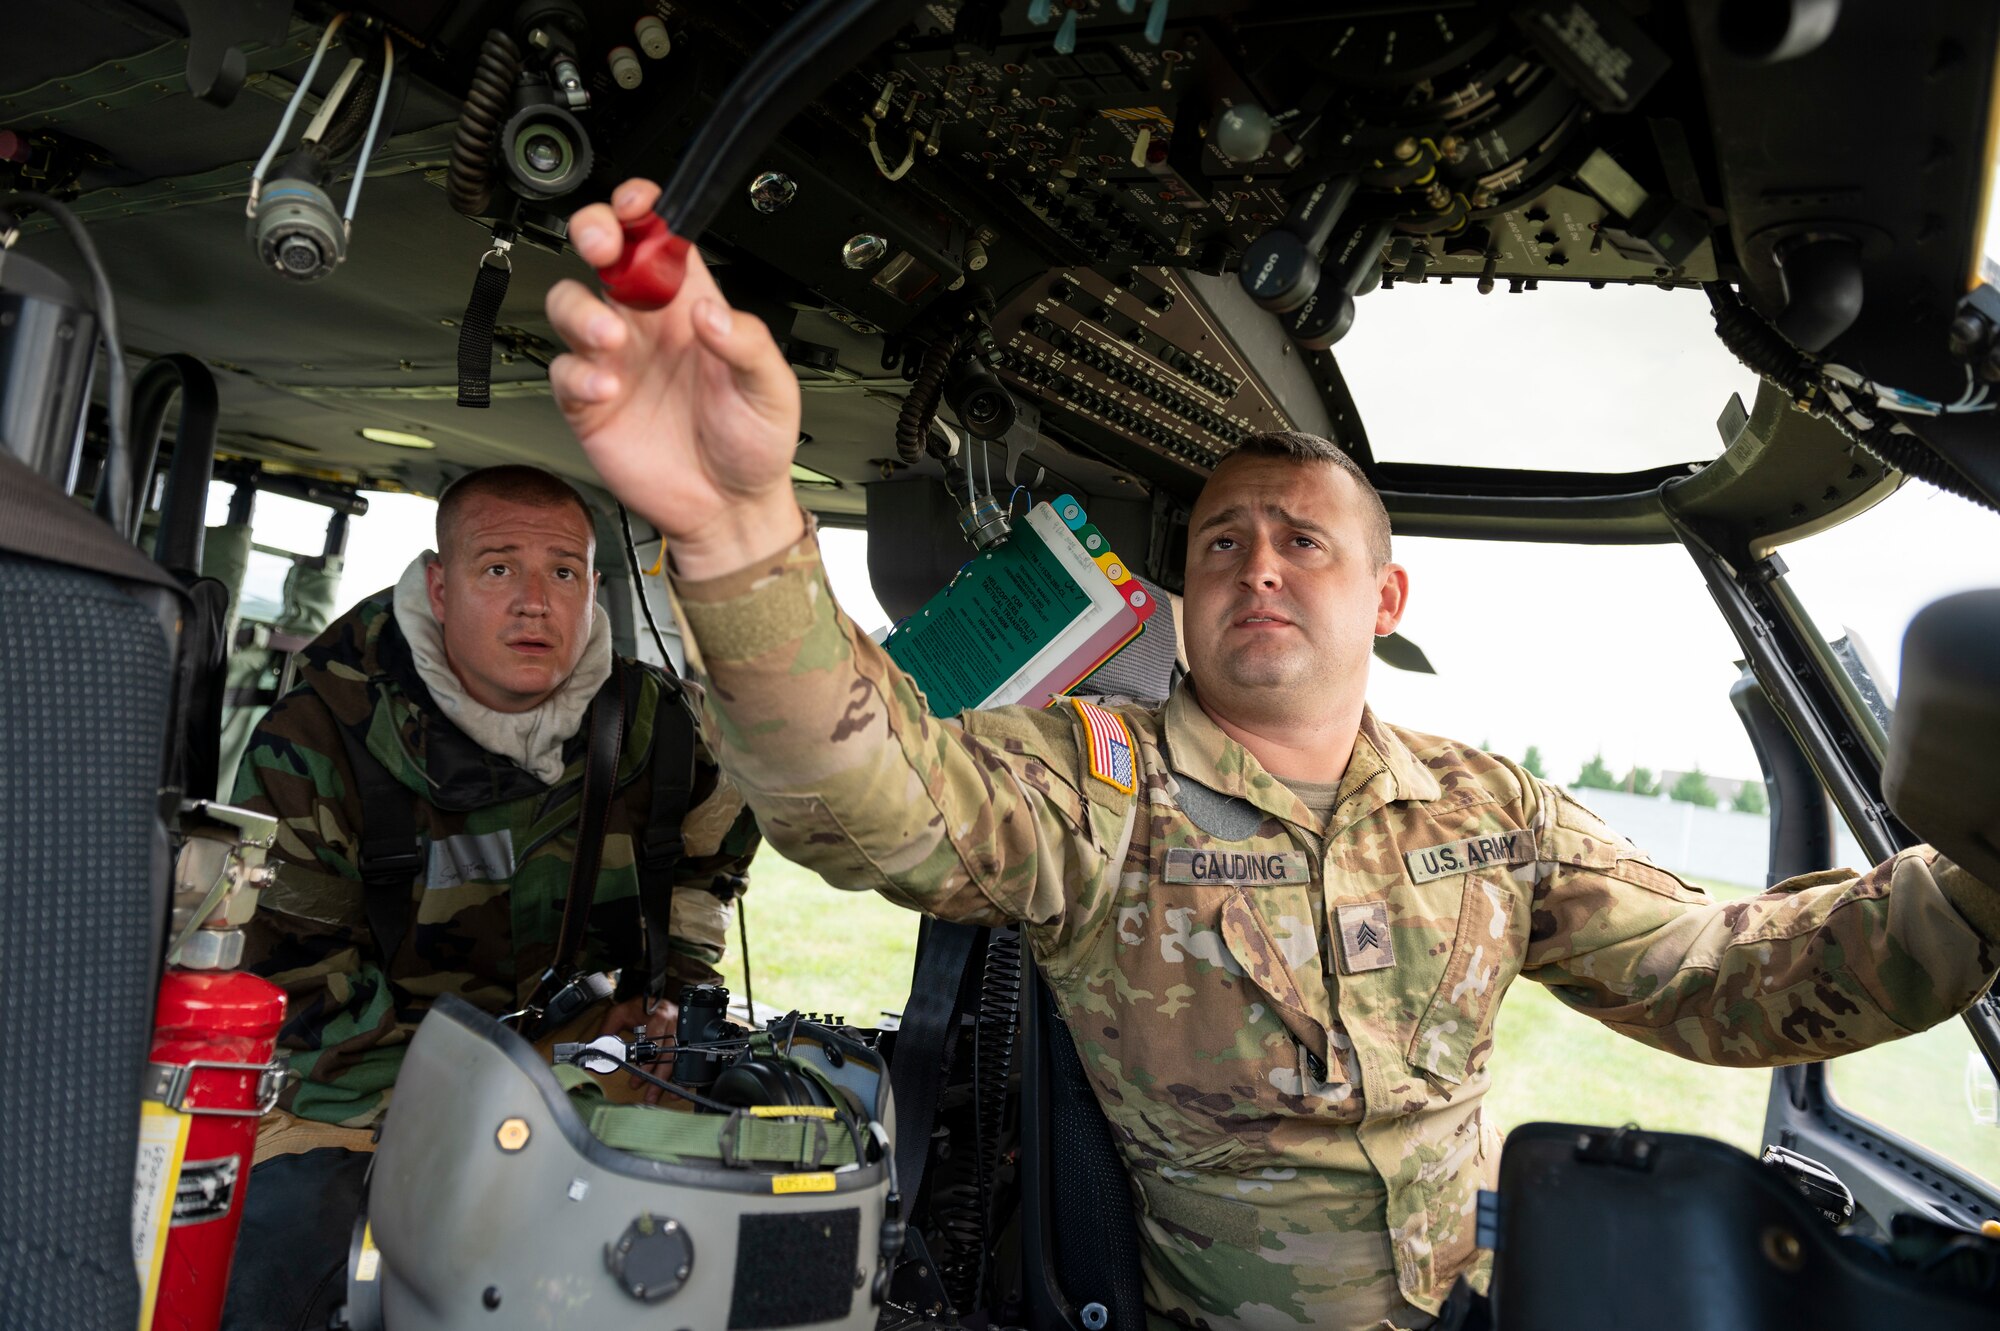 U.S. Army Sgt. Cordell Gaulding, a crew chief from C Company, 1st Battalion, 150th Aviation Regiment, shows emergency shutdown procedures to U.S. Air Force Staff Sgt. Timothy Sanders, a firefighter with the 167th Airlift Wing, during a UH-60M Black Hawk helicopter crash landing incident response as part of a readiness exercise at the 167th Airlift Wing, Martinsburg, West Virginia, Aug, 12, 2023.